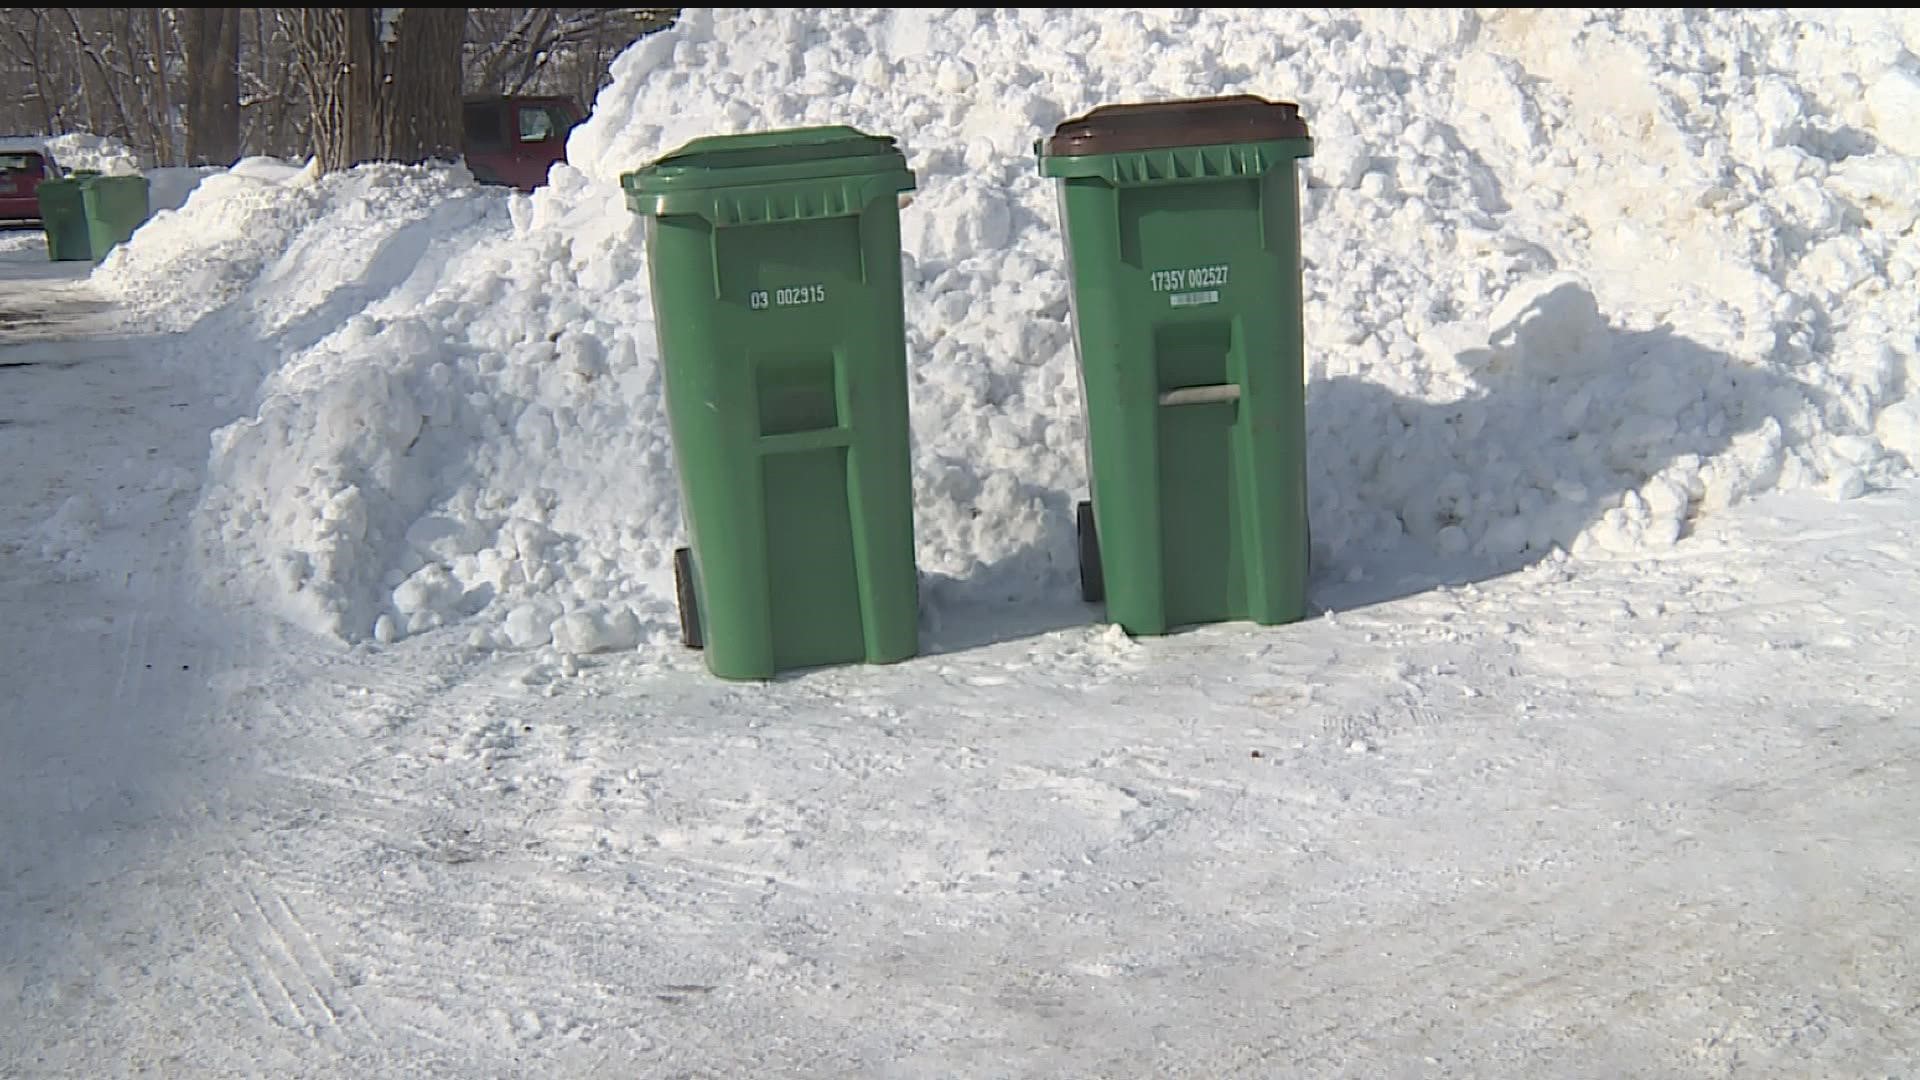 Many cities require residents to shovel out a 3-foot-wide path for garbage bins, but city leaders say several bins are still stuck in the snow.